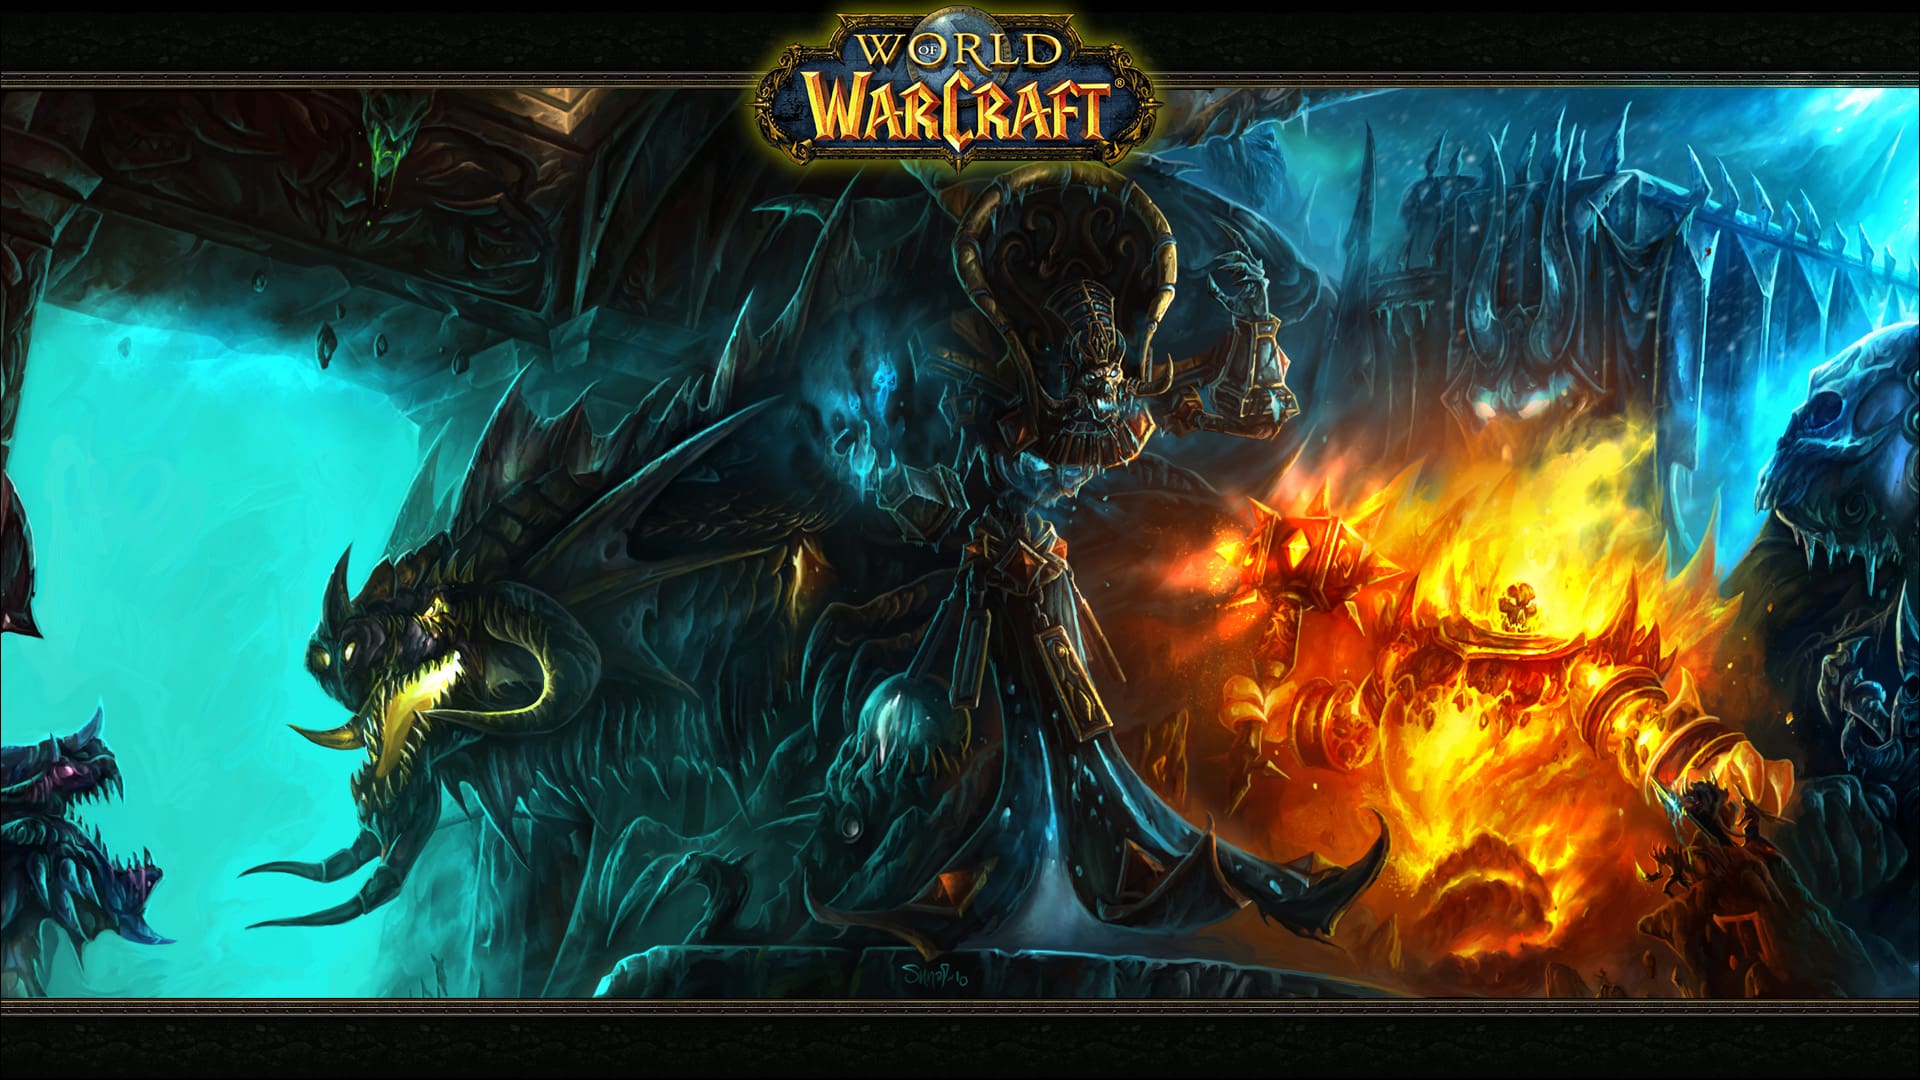 The World of Warcraft For the First time: What Do Beginners Need To Know?